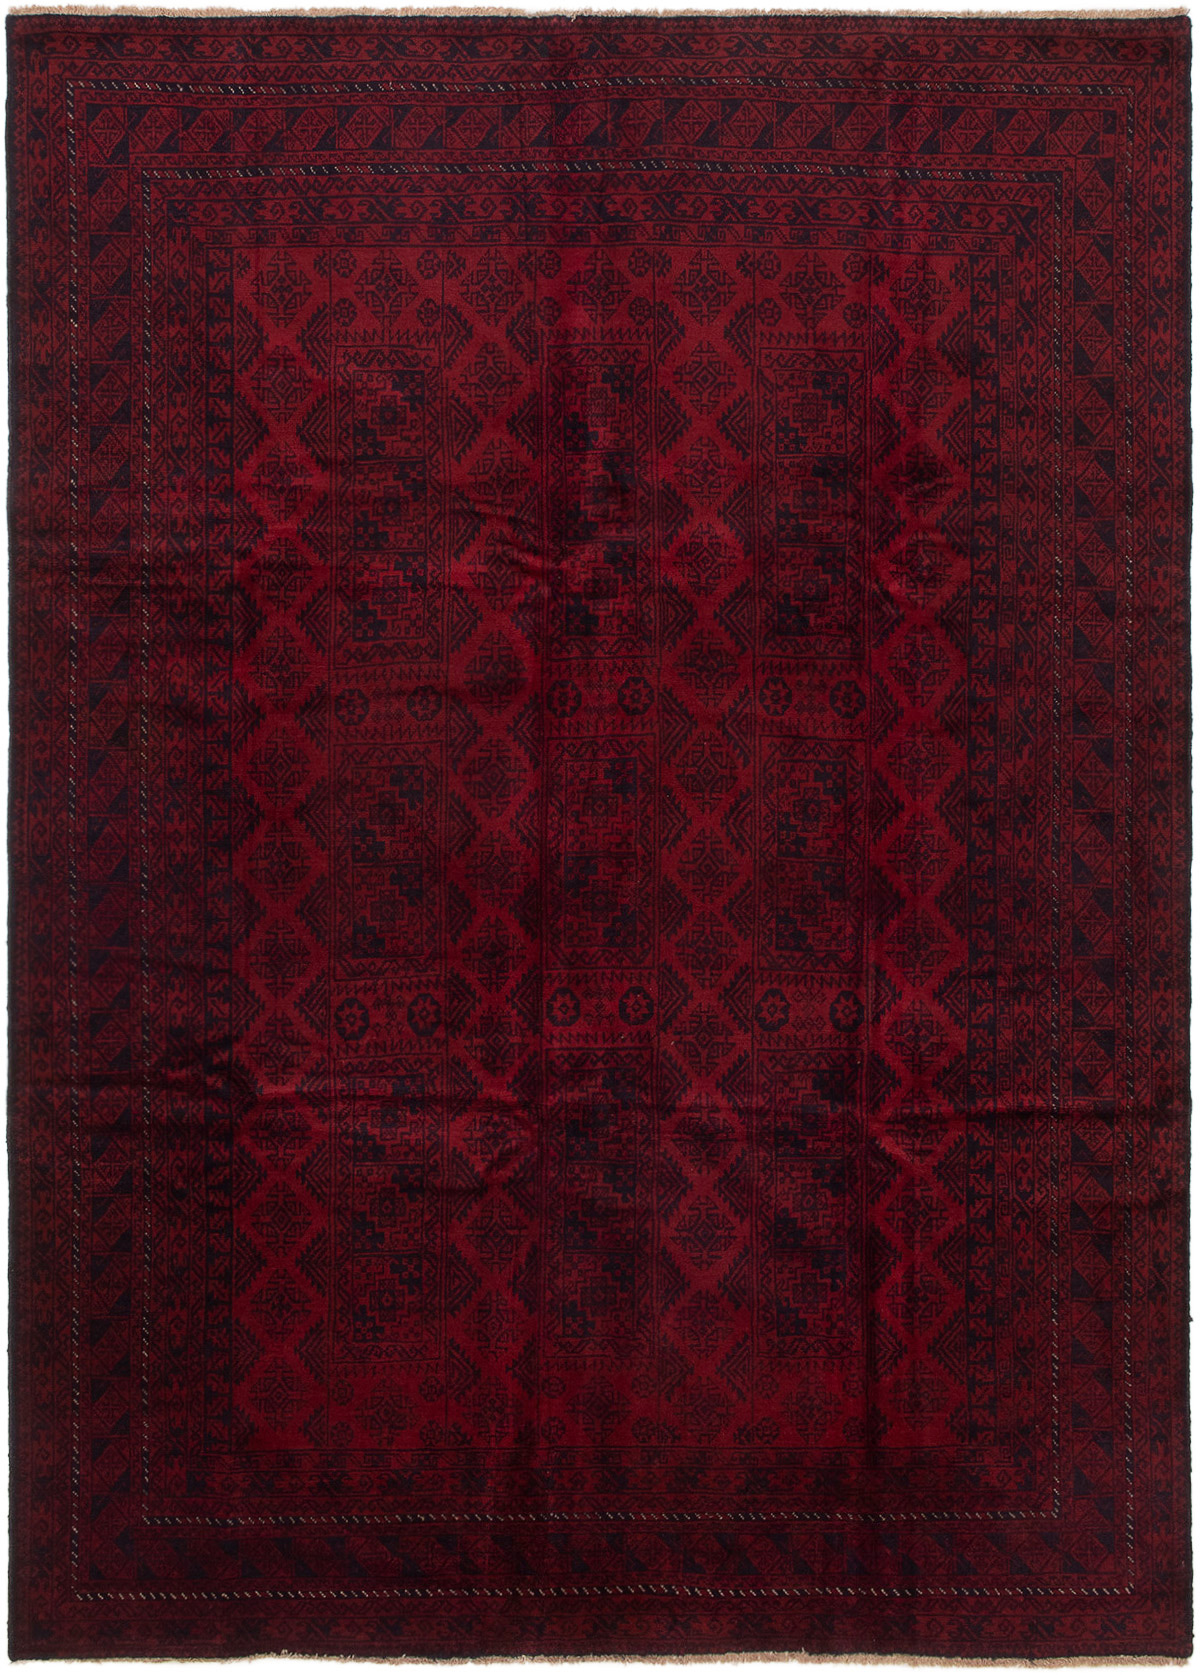 Hand-knotted Teimani Black, Red Wool Rug 6'10" x 9'10" Size: 6'10" x 9'10"  